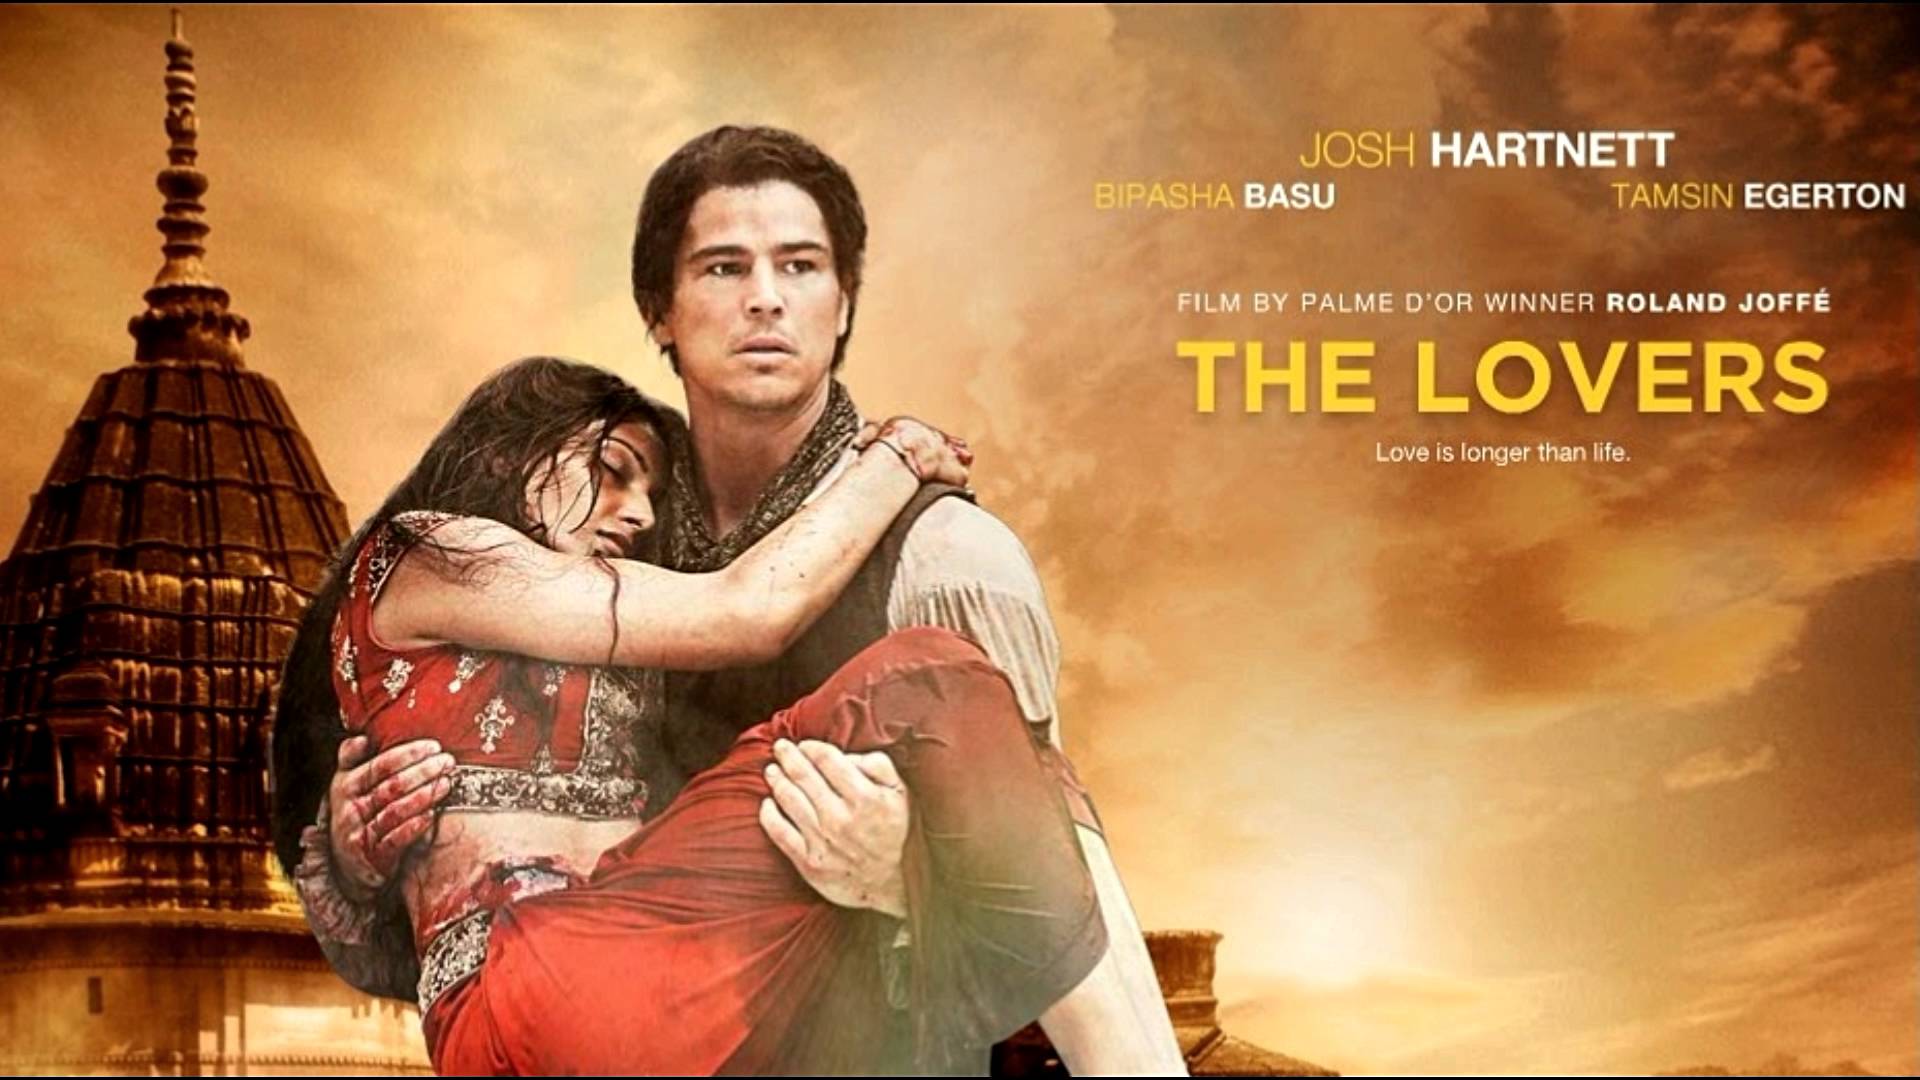 The Lovers (OST) - End Credits - YouTube